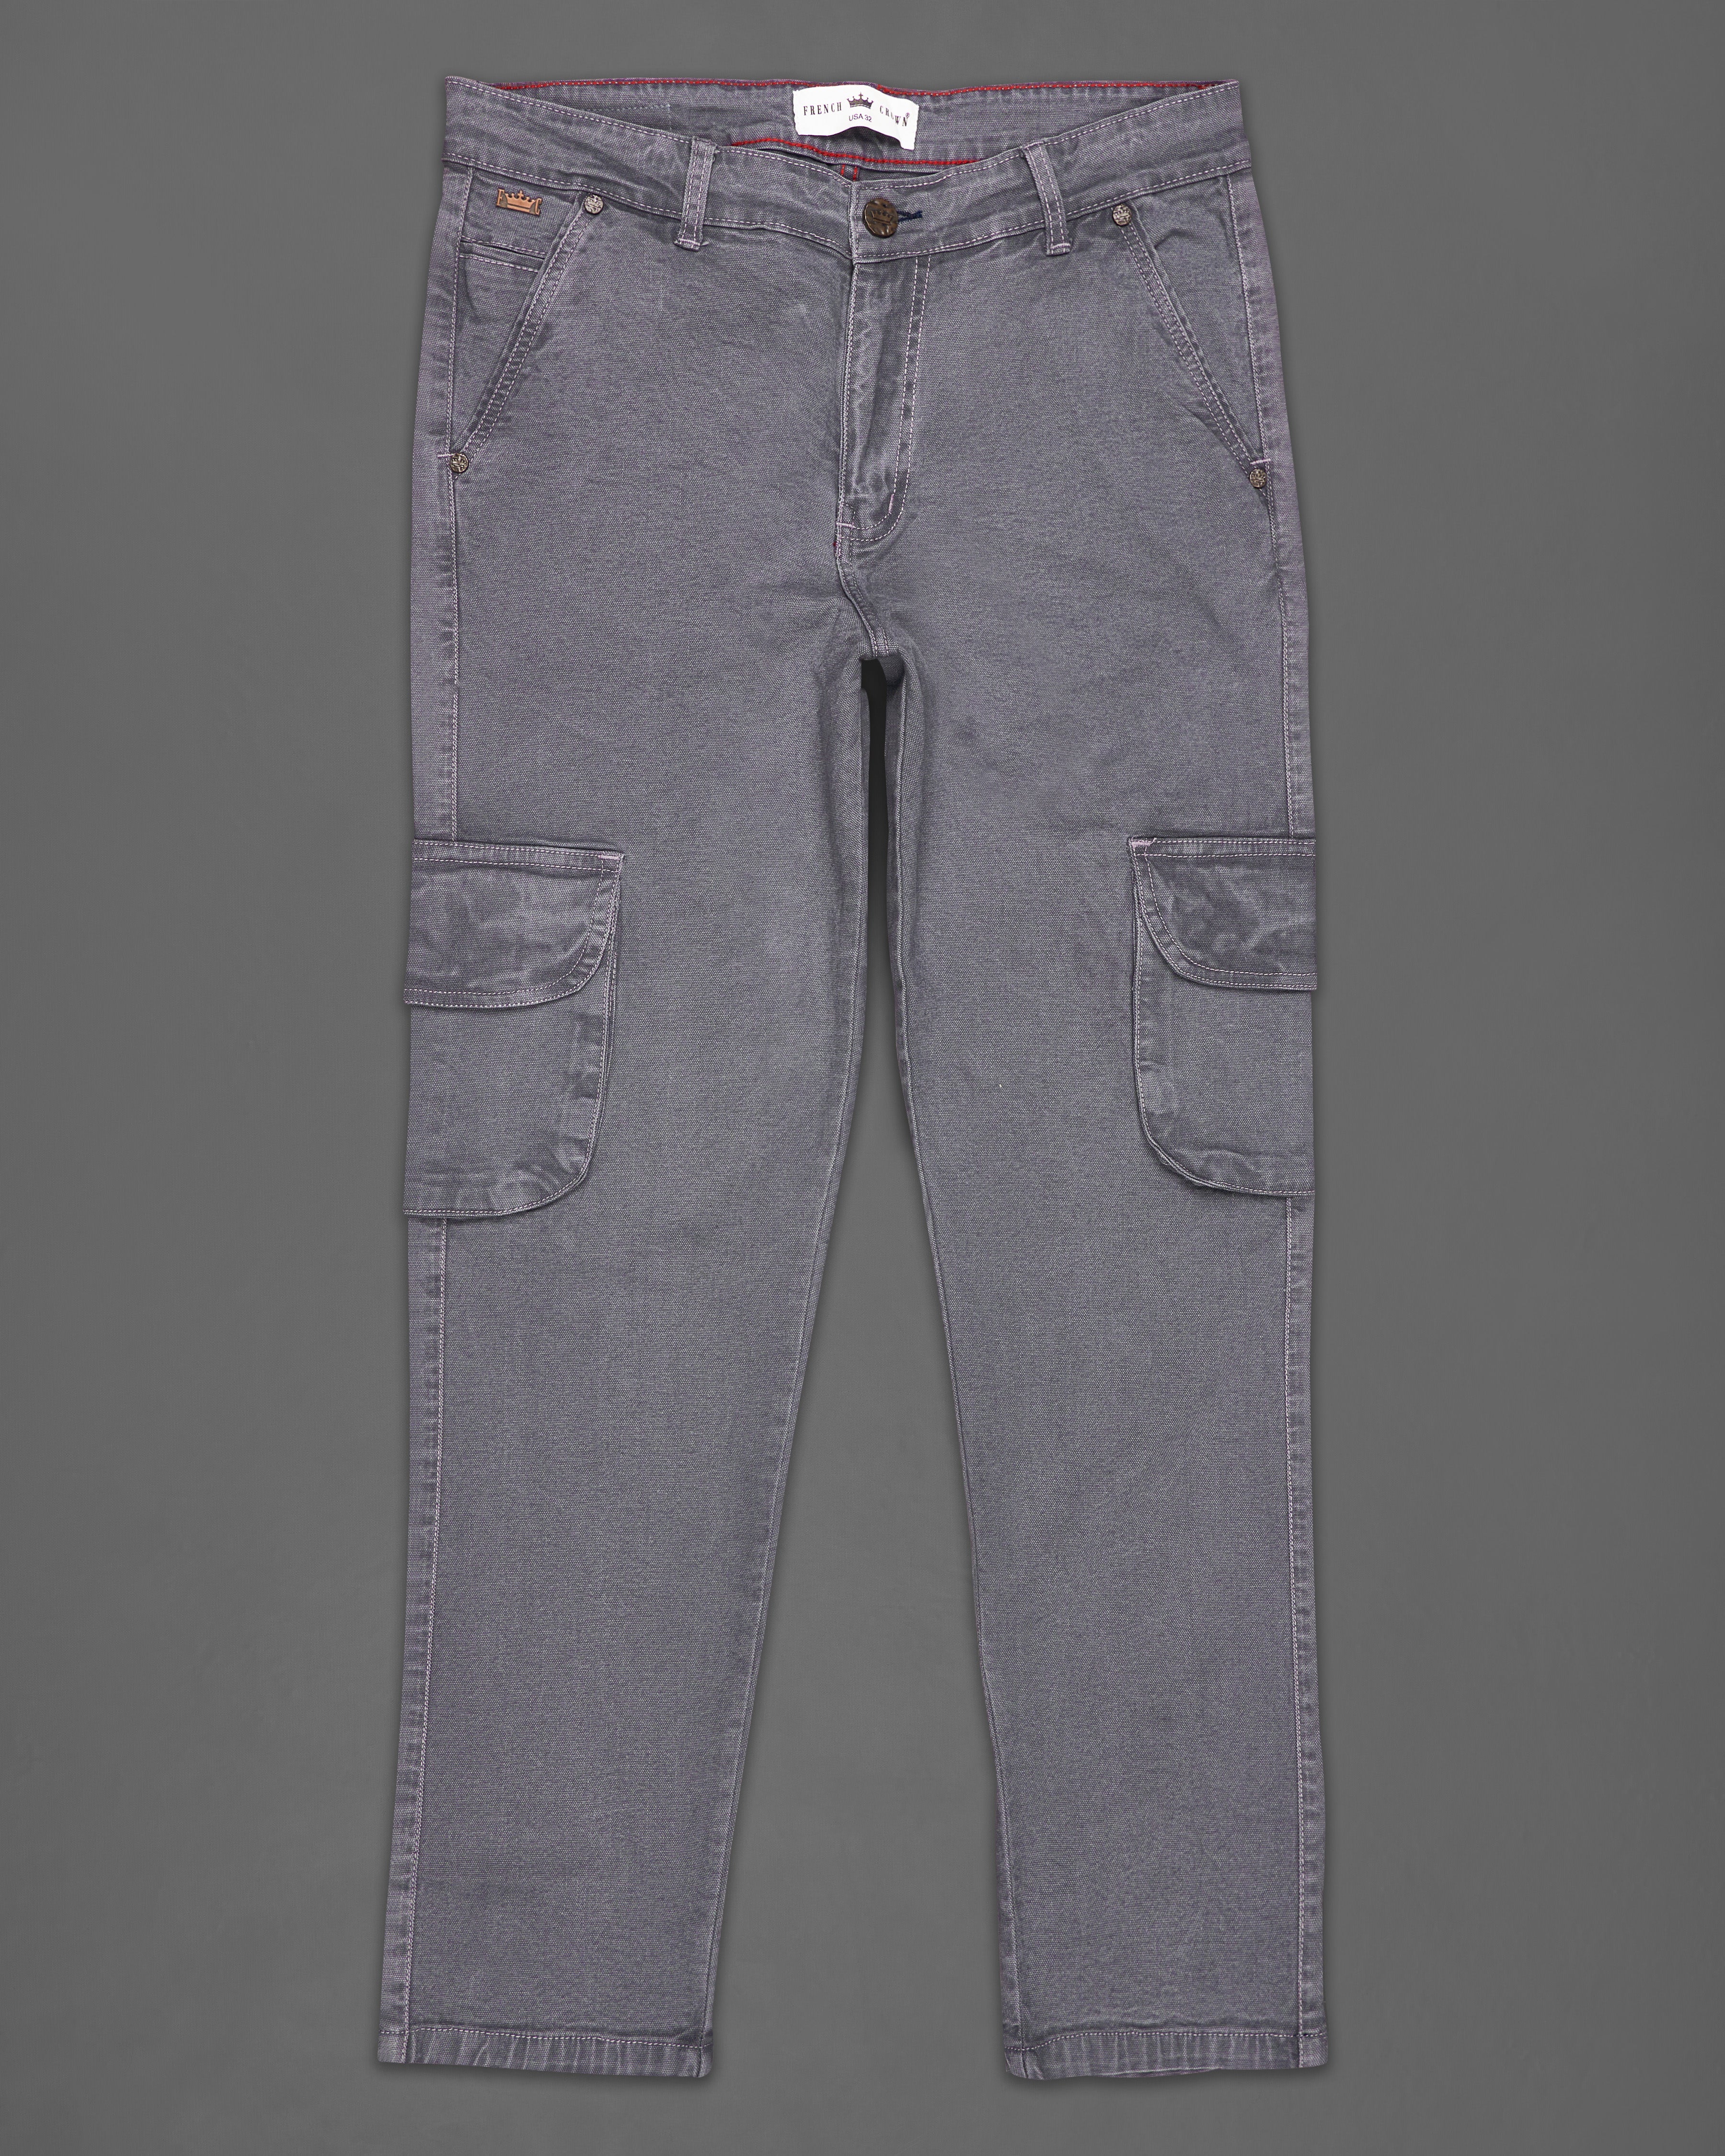 Hypercargo Color X.L.I.T.E. slim fit Jaan jeans - REPLAY Online Store